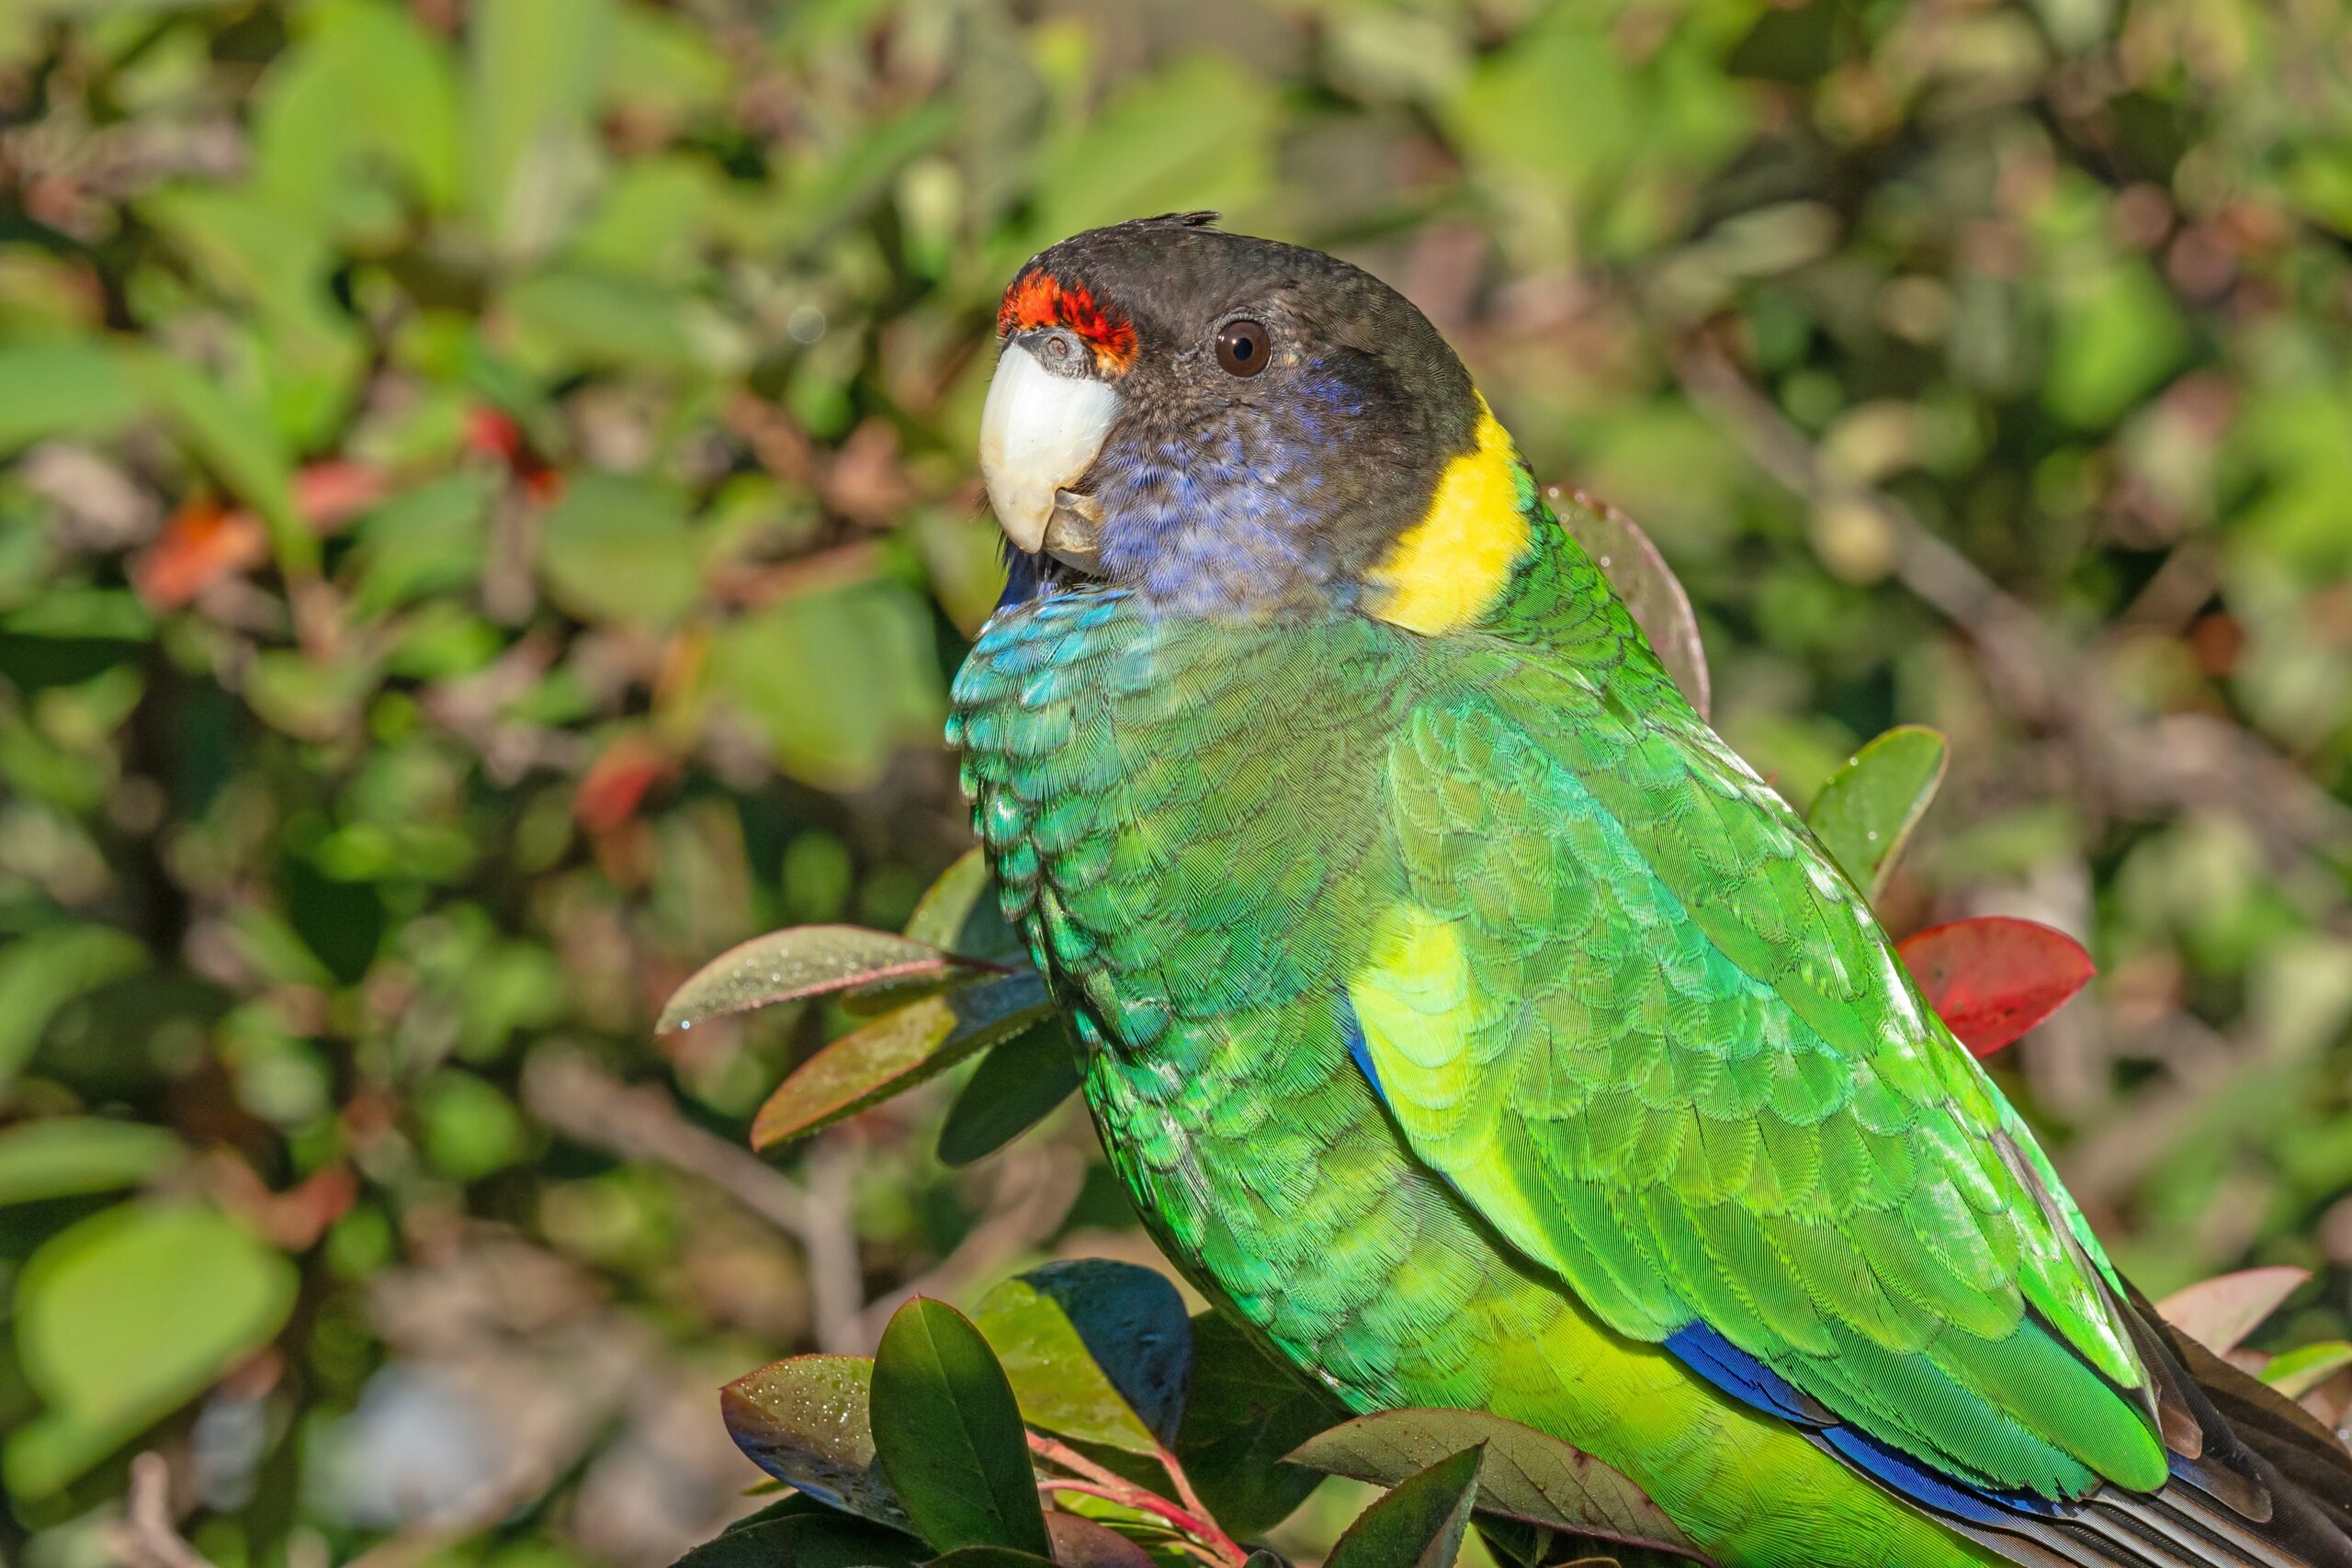 This is a photo of an Australian ringneck parrot. It is mostly green in colour with a yellow band on its neck. It has a blue cheek and a patch of blue on its feathers. It has a brown/black beady eye and a cream beak. Above its beak and nose is a bright red patch. The bird sits on a branch that has green leaves with a red stem.